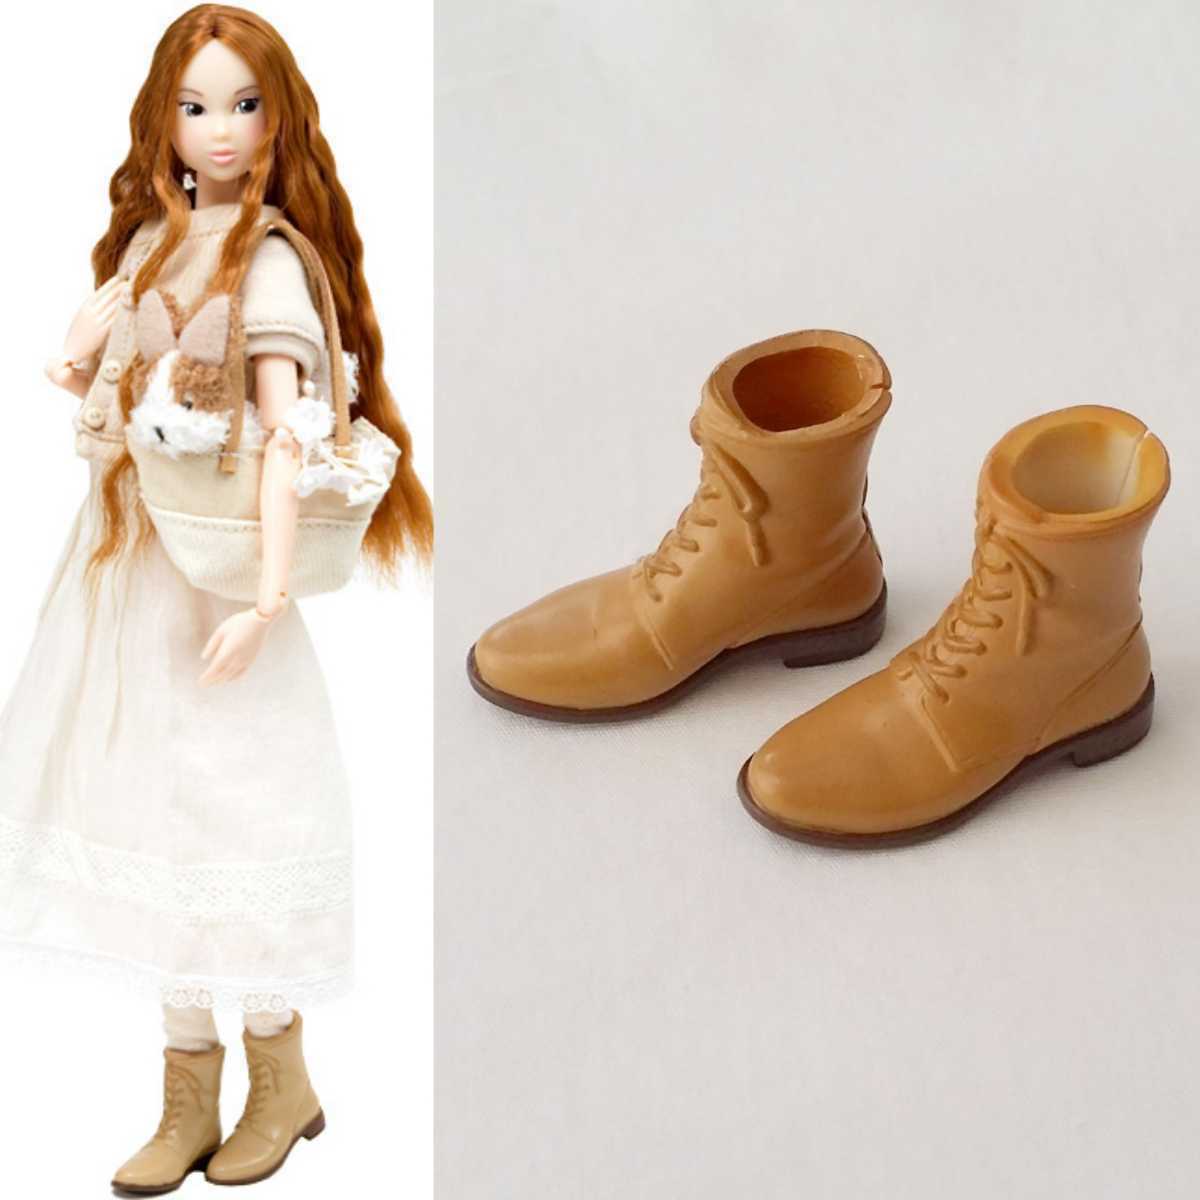 Momokodoll Glossy Beige Half Boots Limited Accessories With Puppies Shoe Momoko